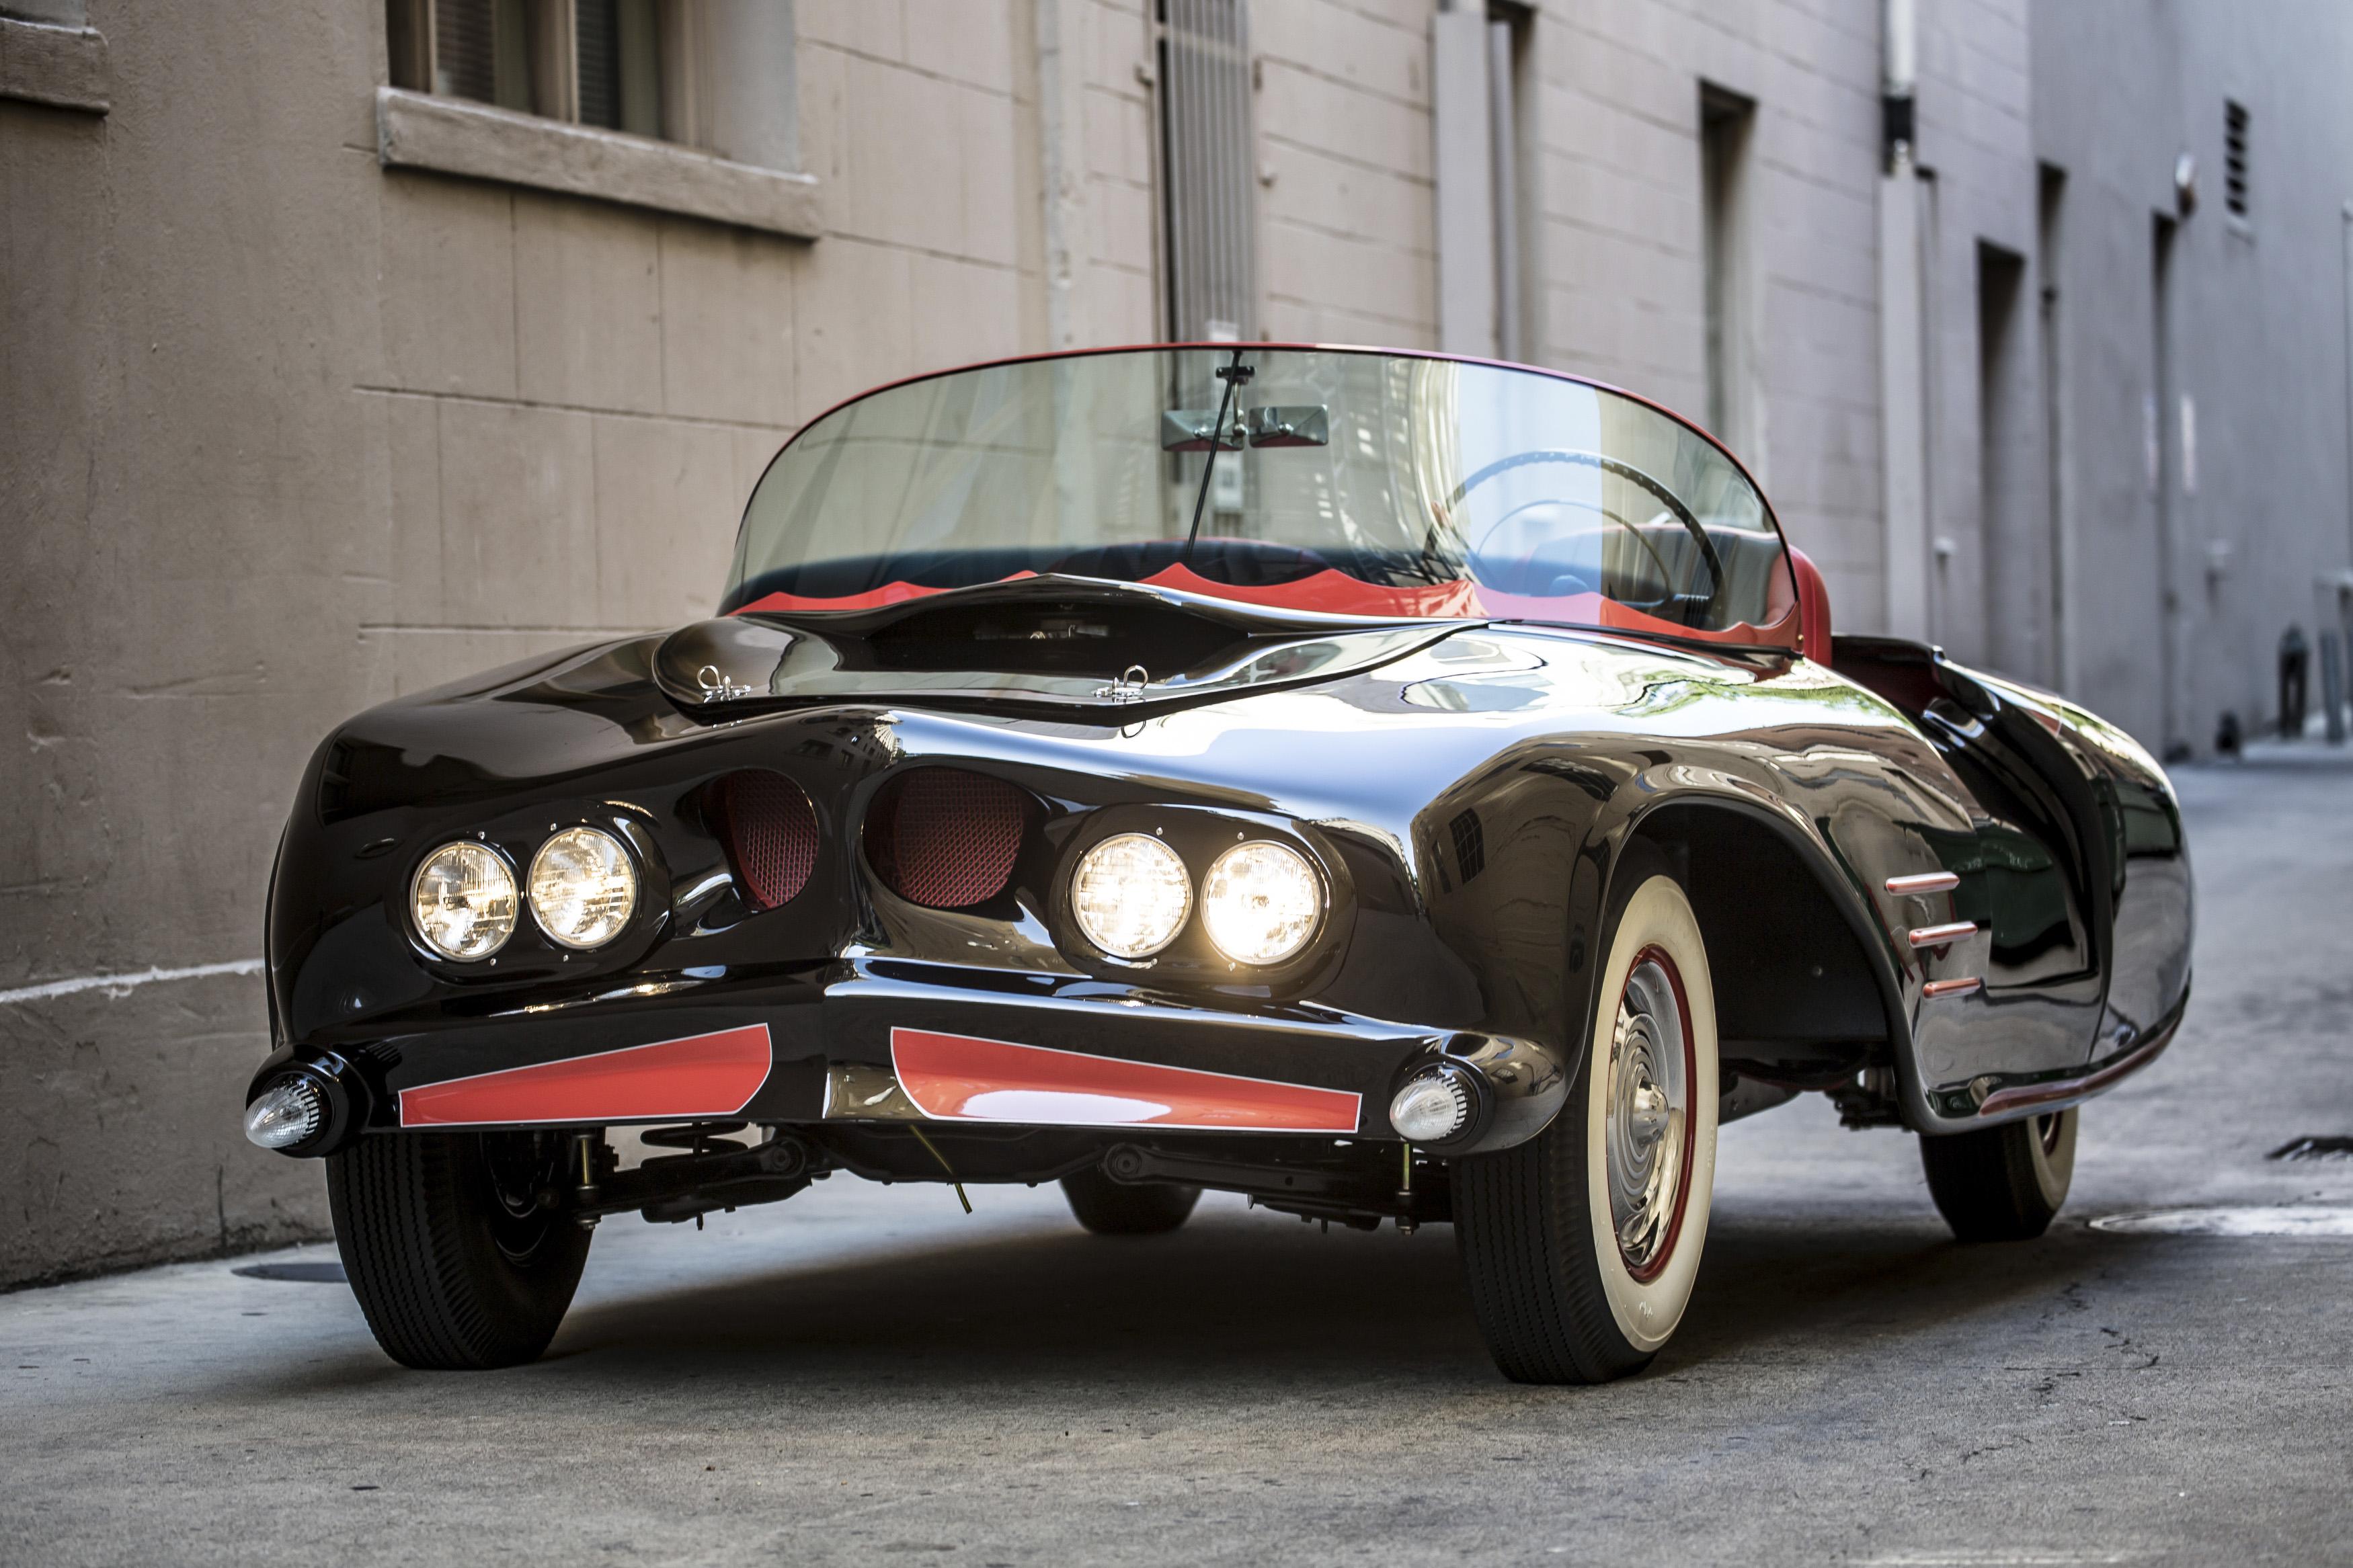 The 1963 Batmobile is shown in this photo released by Heritage Auctions, HA.com